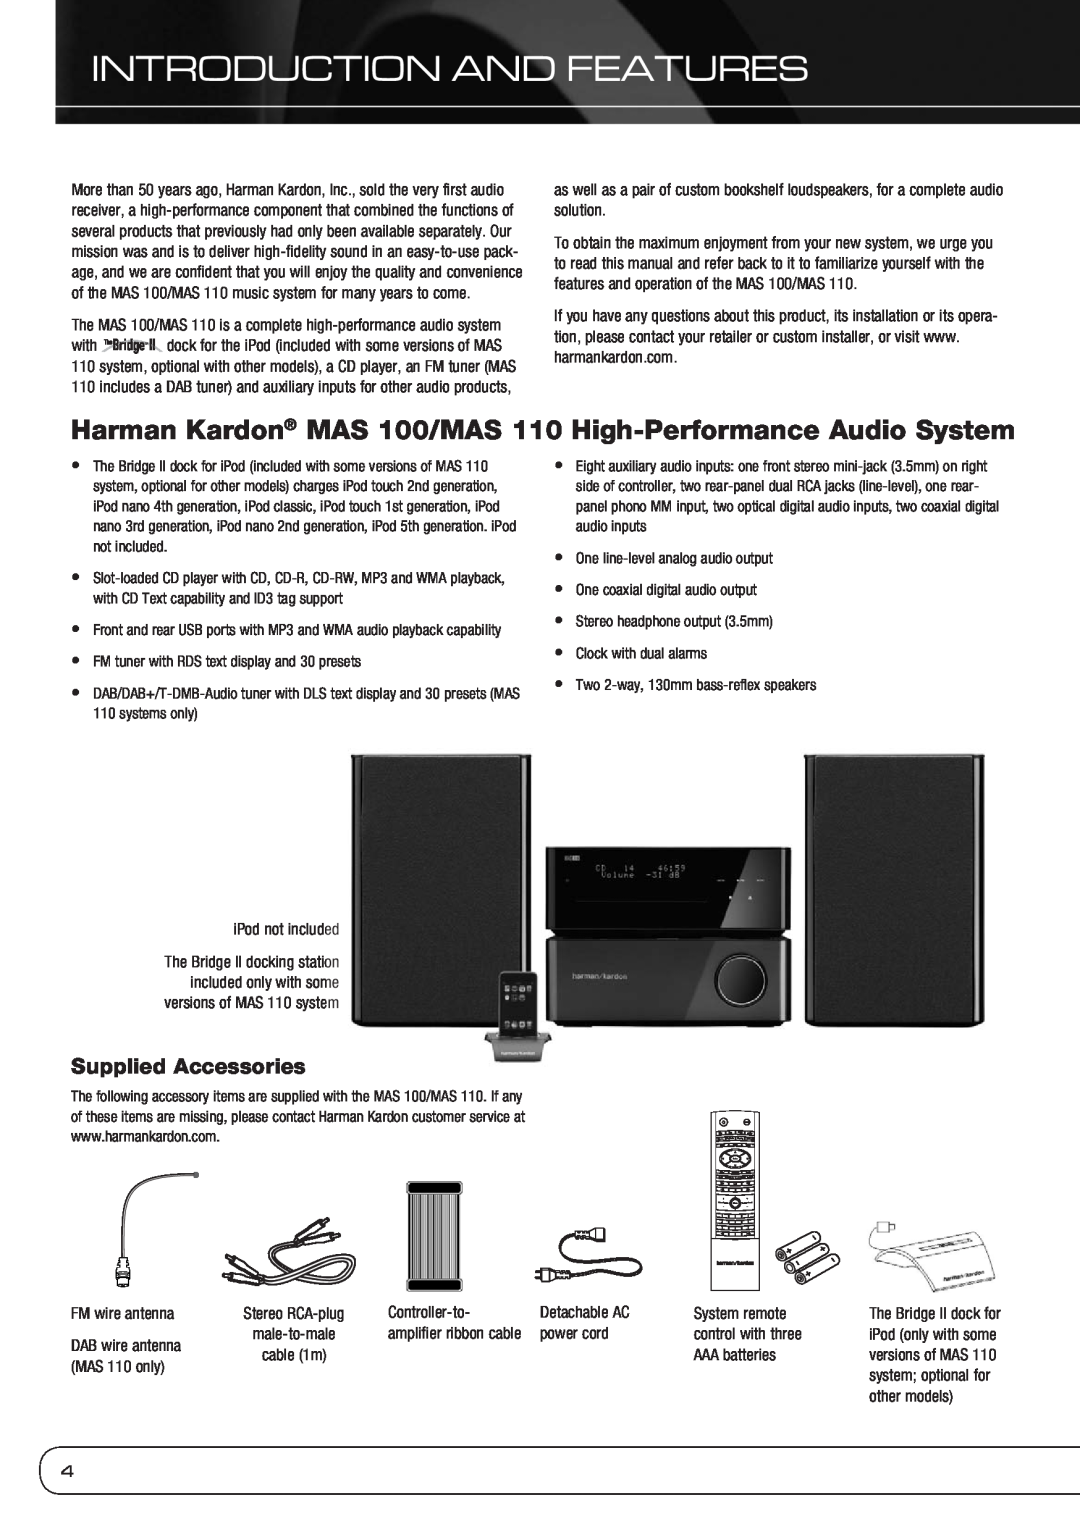 Harman-Kardon MAS 100, MAS 110 owner manual Introduction And Features, Supplied Accessories 